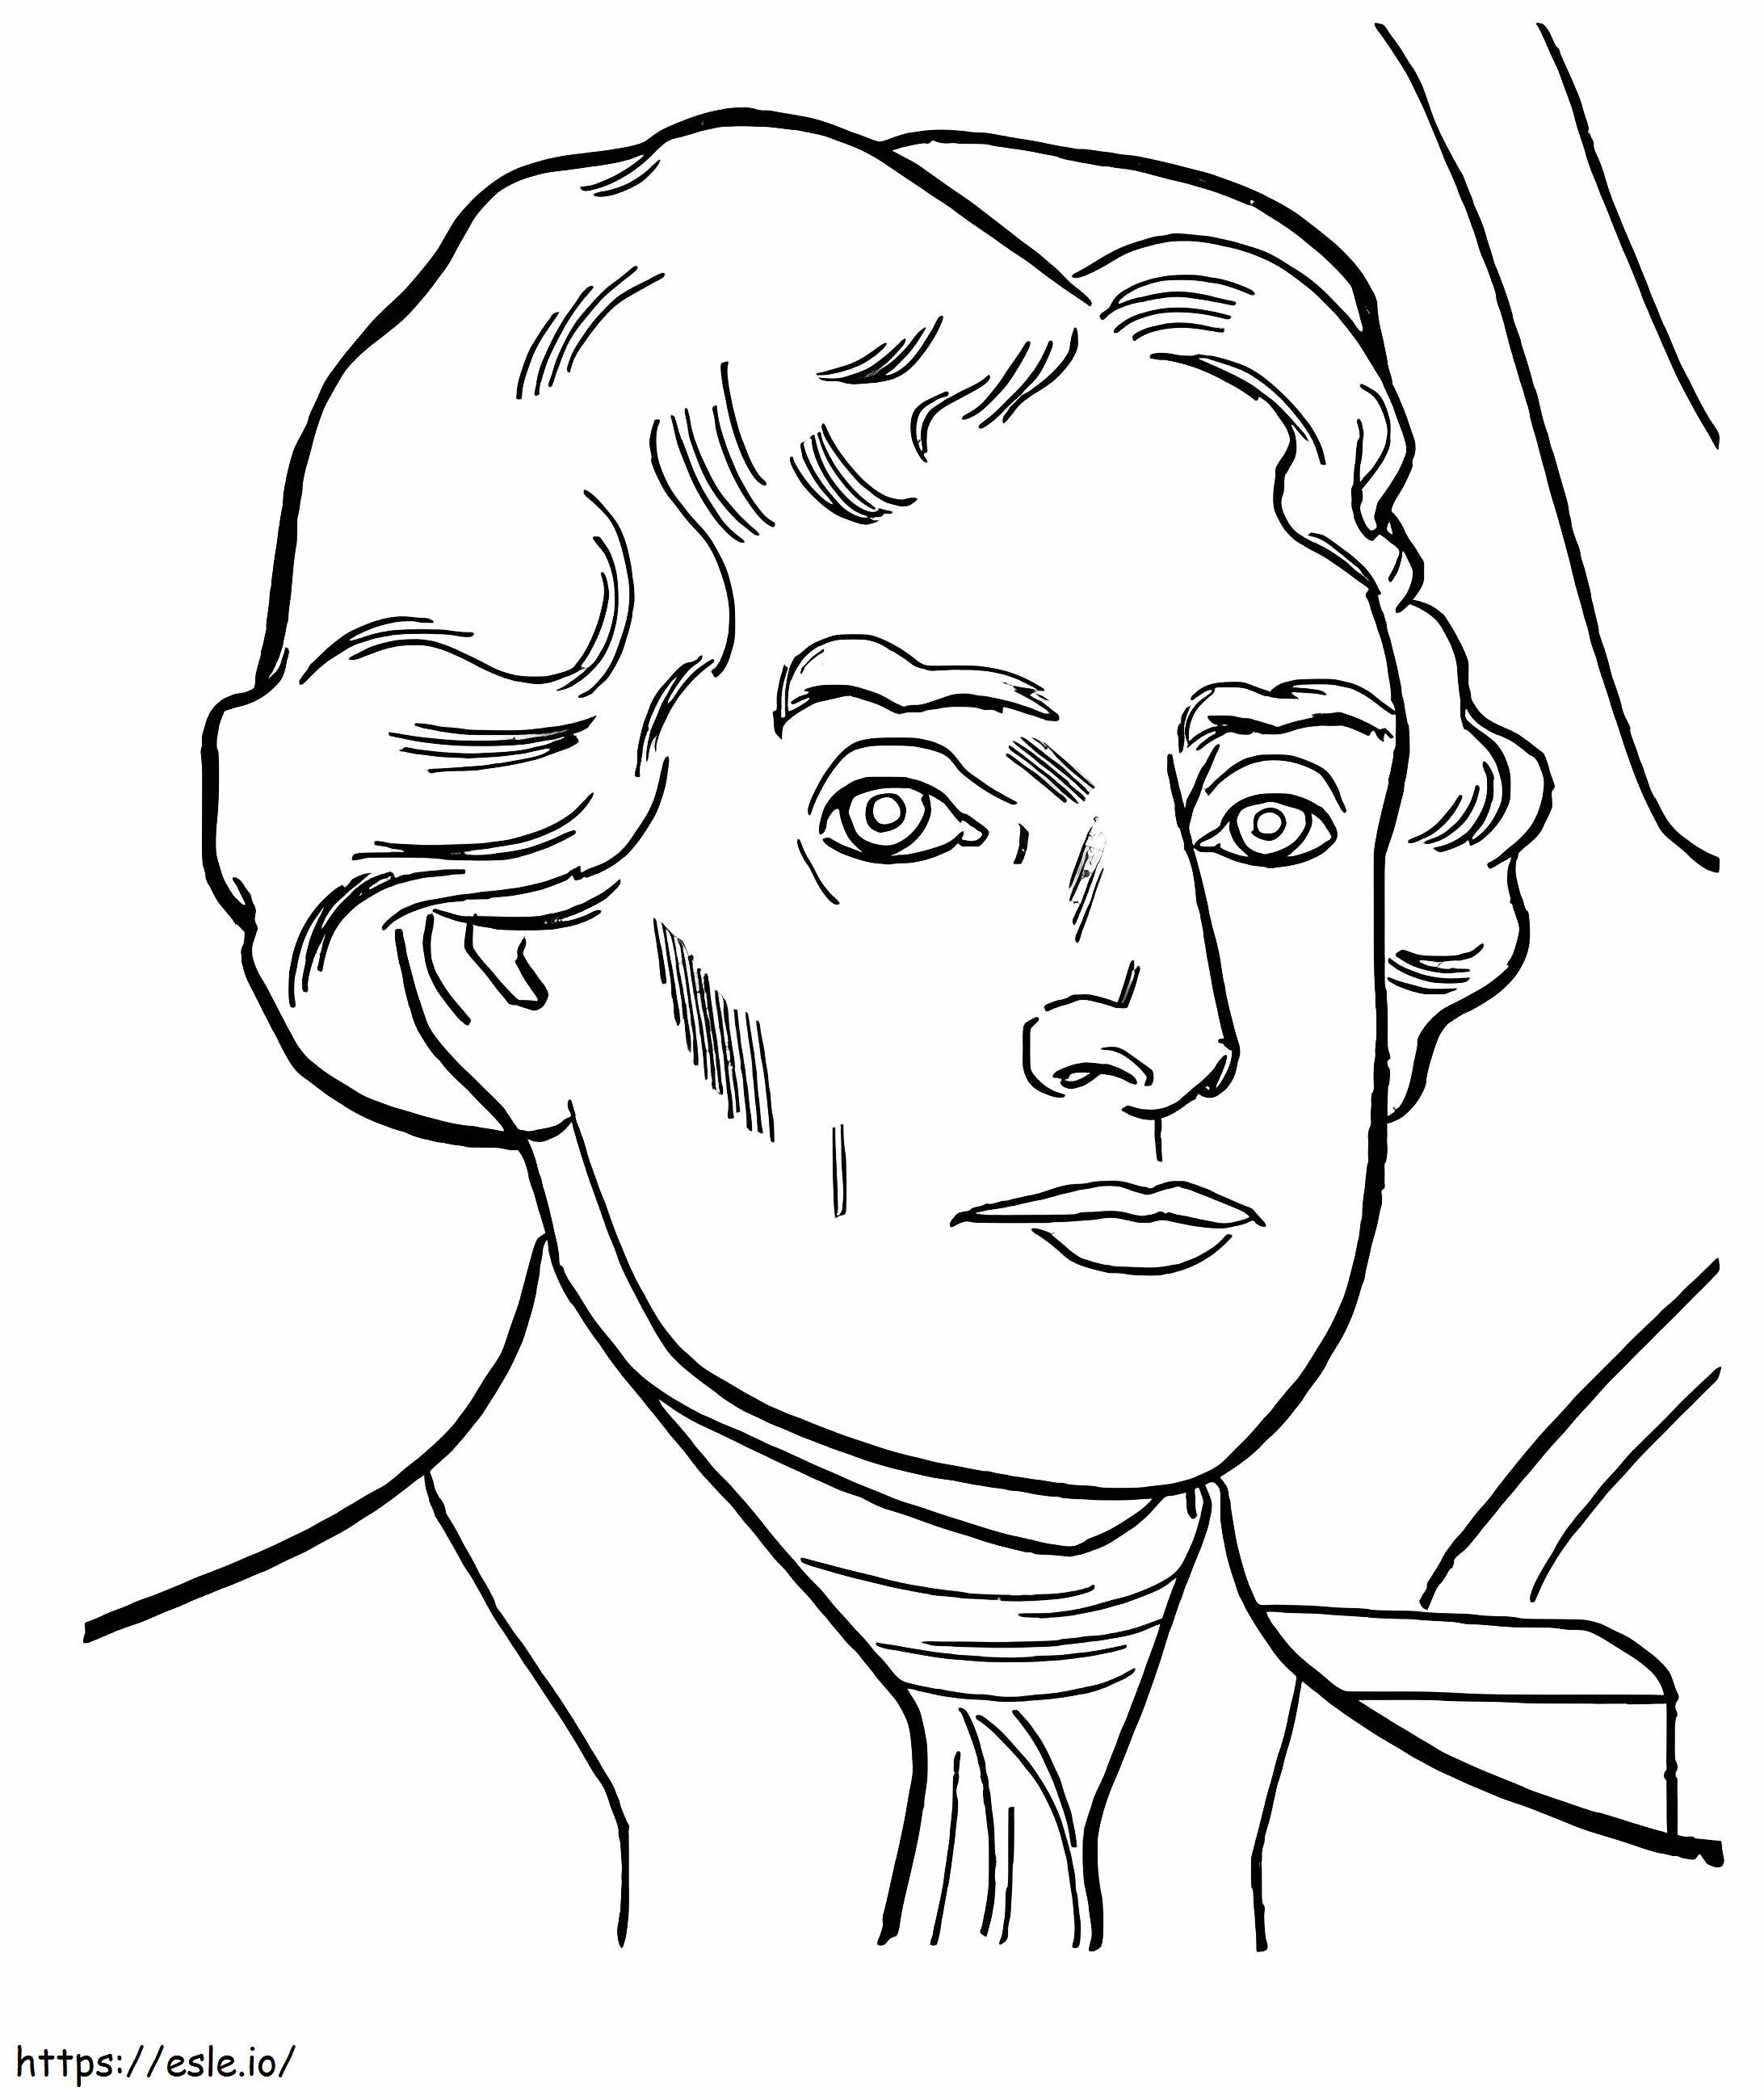 3Rd President Thomas Jefferson coloring page